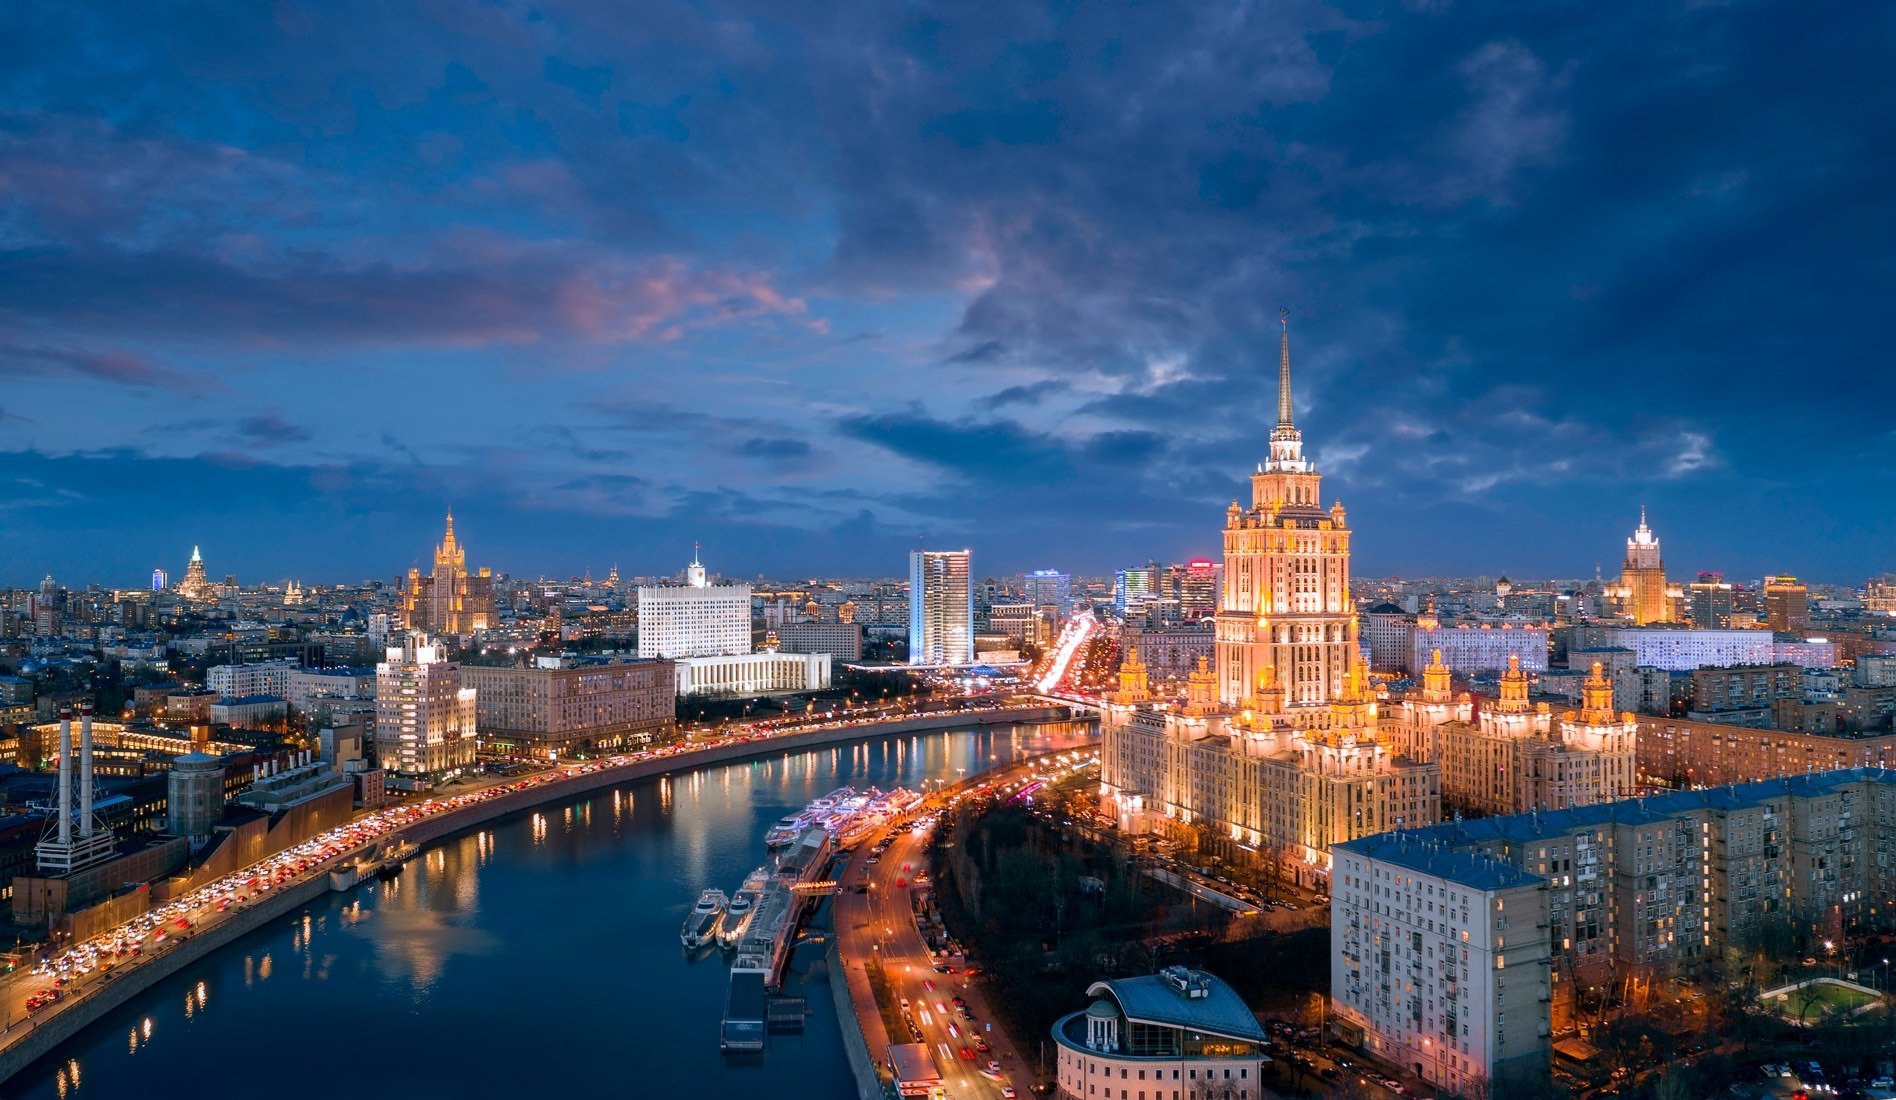 Moscow center by sunset copy.jpg